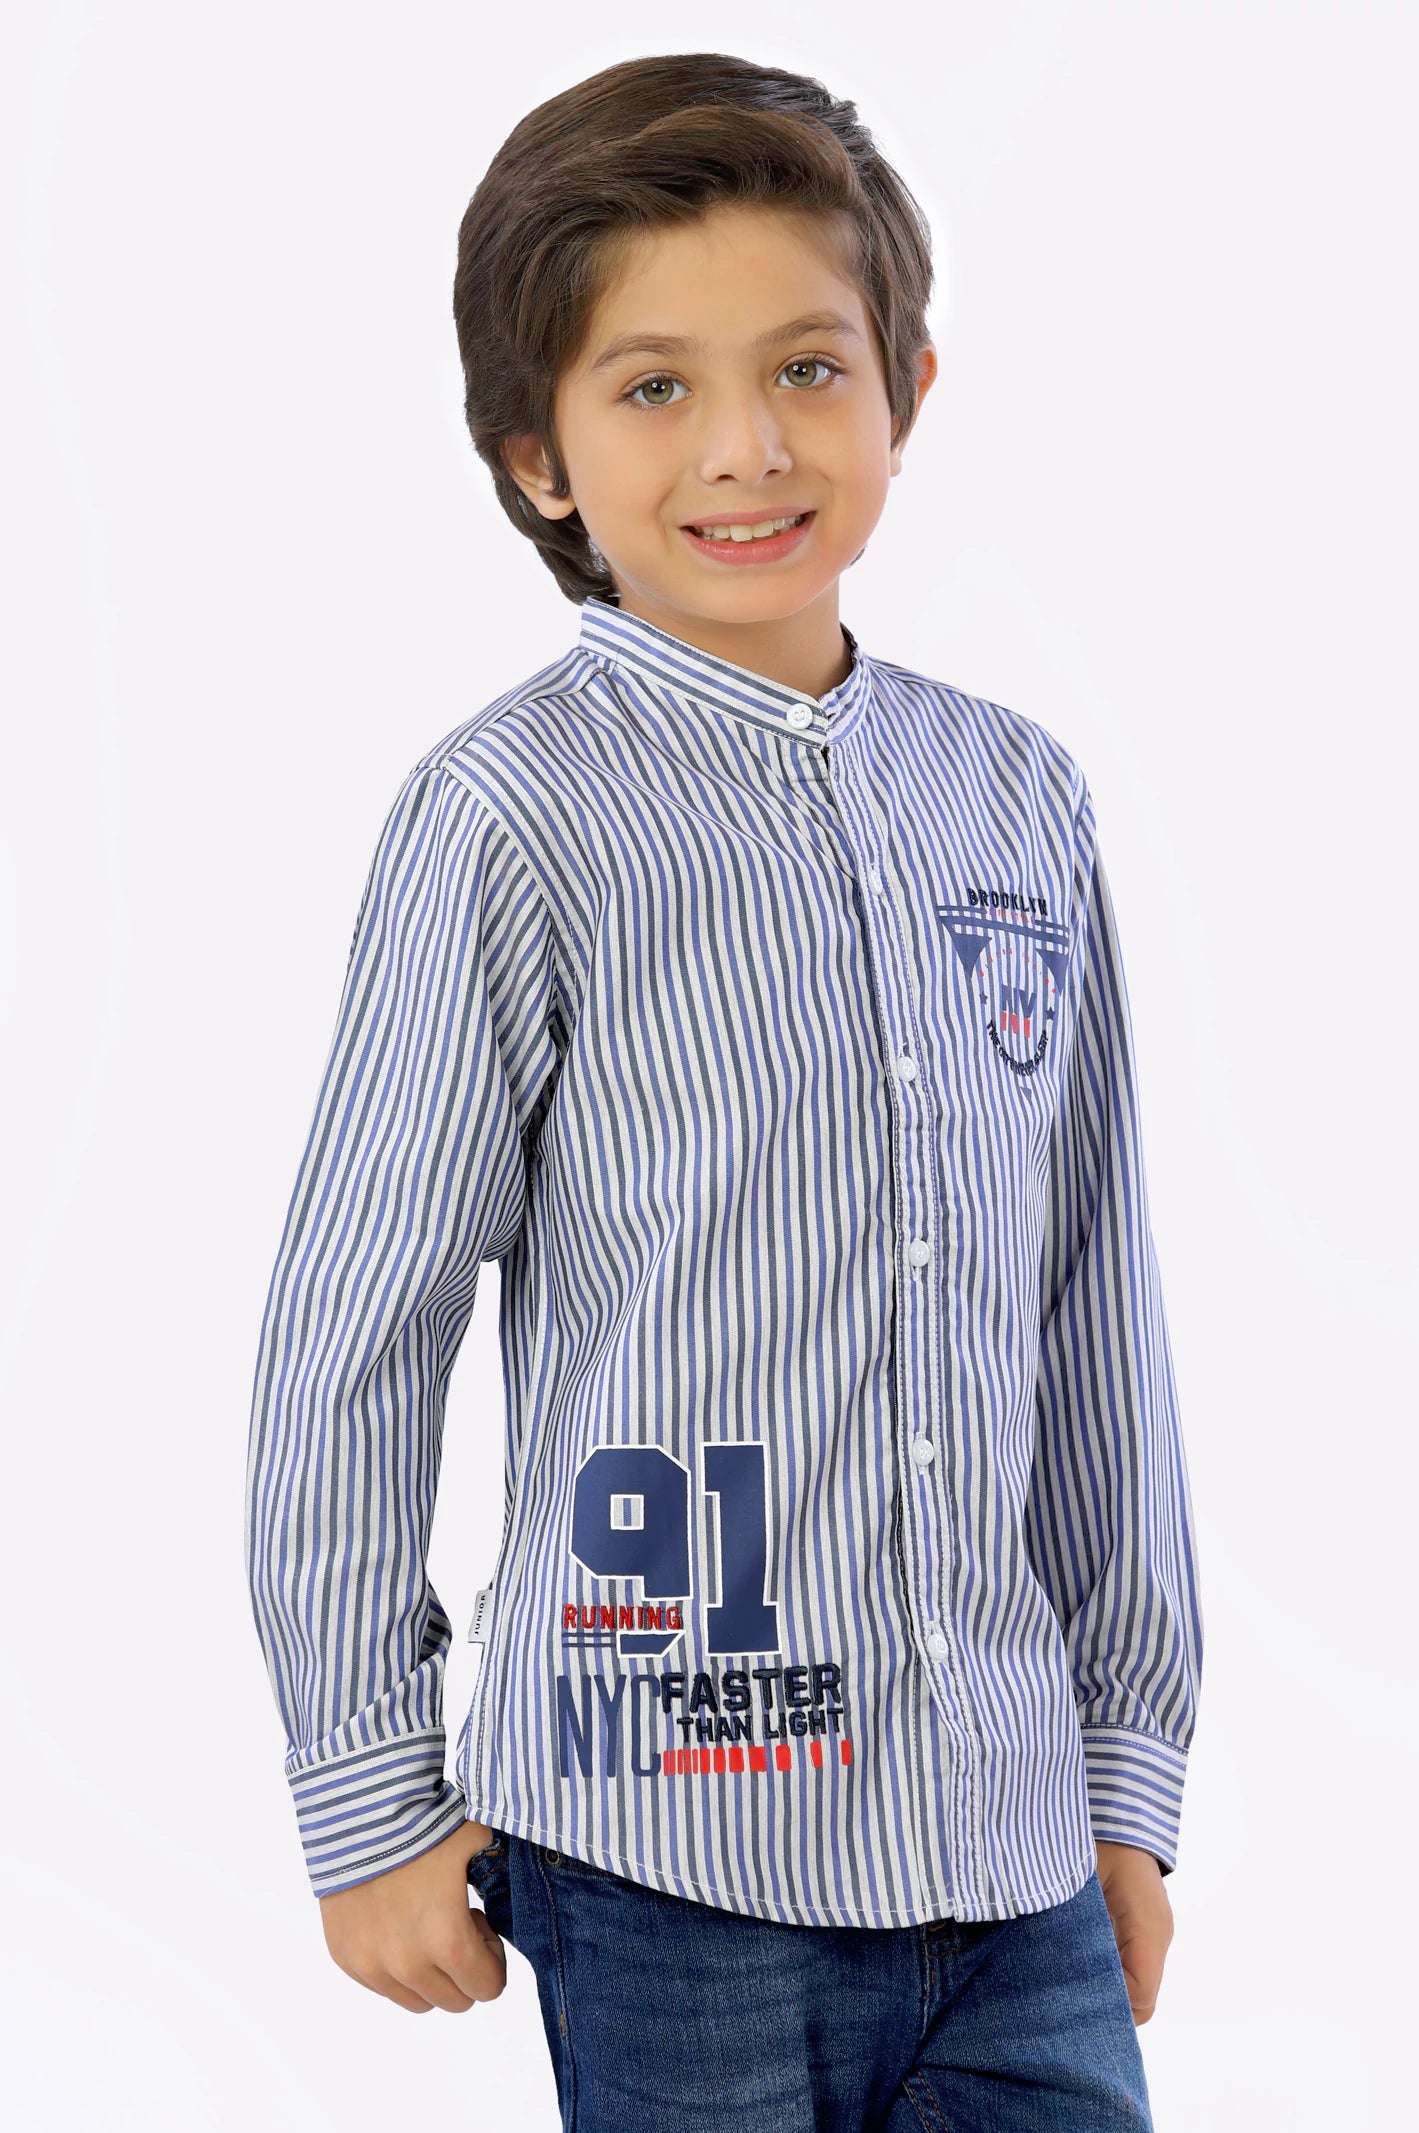 Blue Bengal Stripes Boys Shirt From Diners